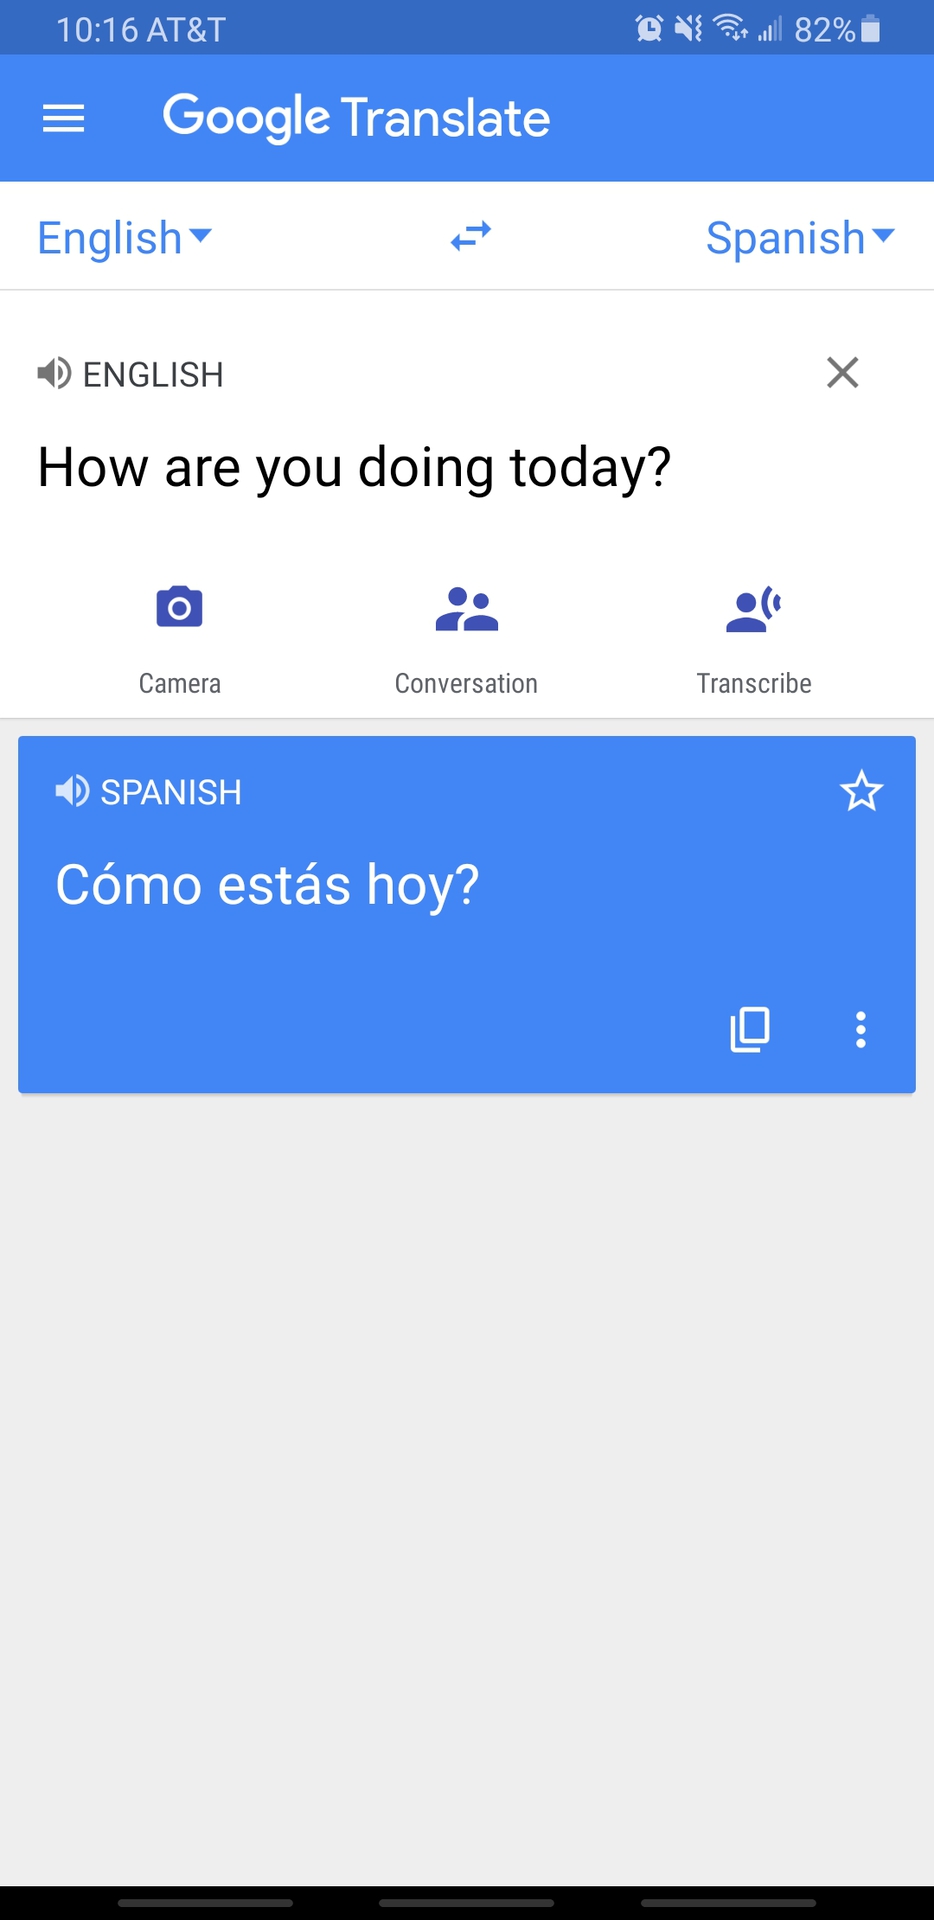 english to spanish text of how are you doing today?